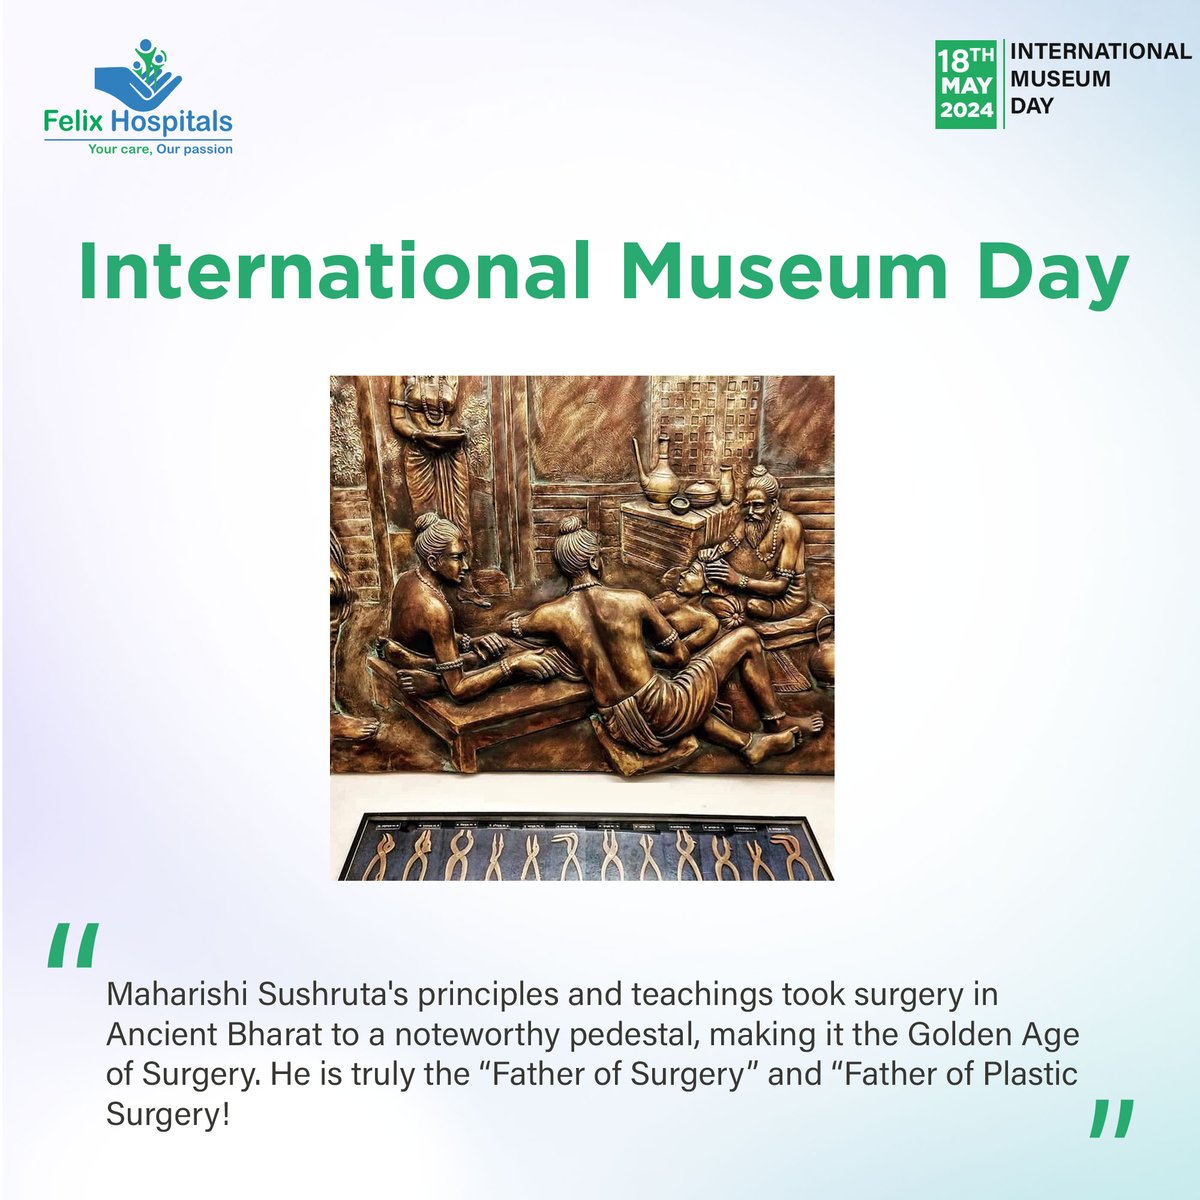 Explore the amazing world of culture! 📷 It's International Museum Day! Celebrate the stories and creativity in museums. They're bridges to our past, present, and future. Let's cherish them! #InternationalMuseumDay #ExploreHistory #letsgo #museum #museumday #besthospitalinnoida